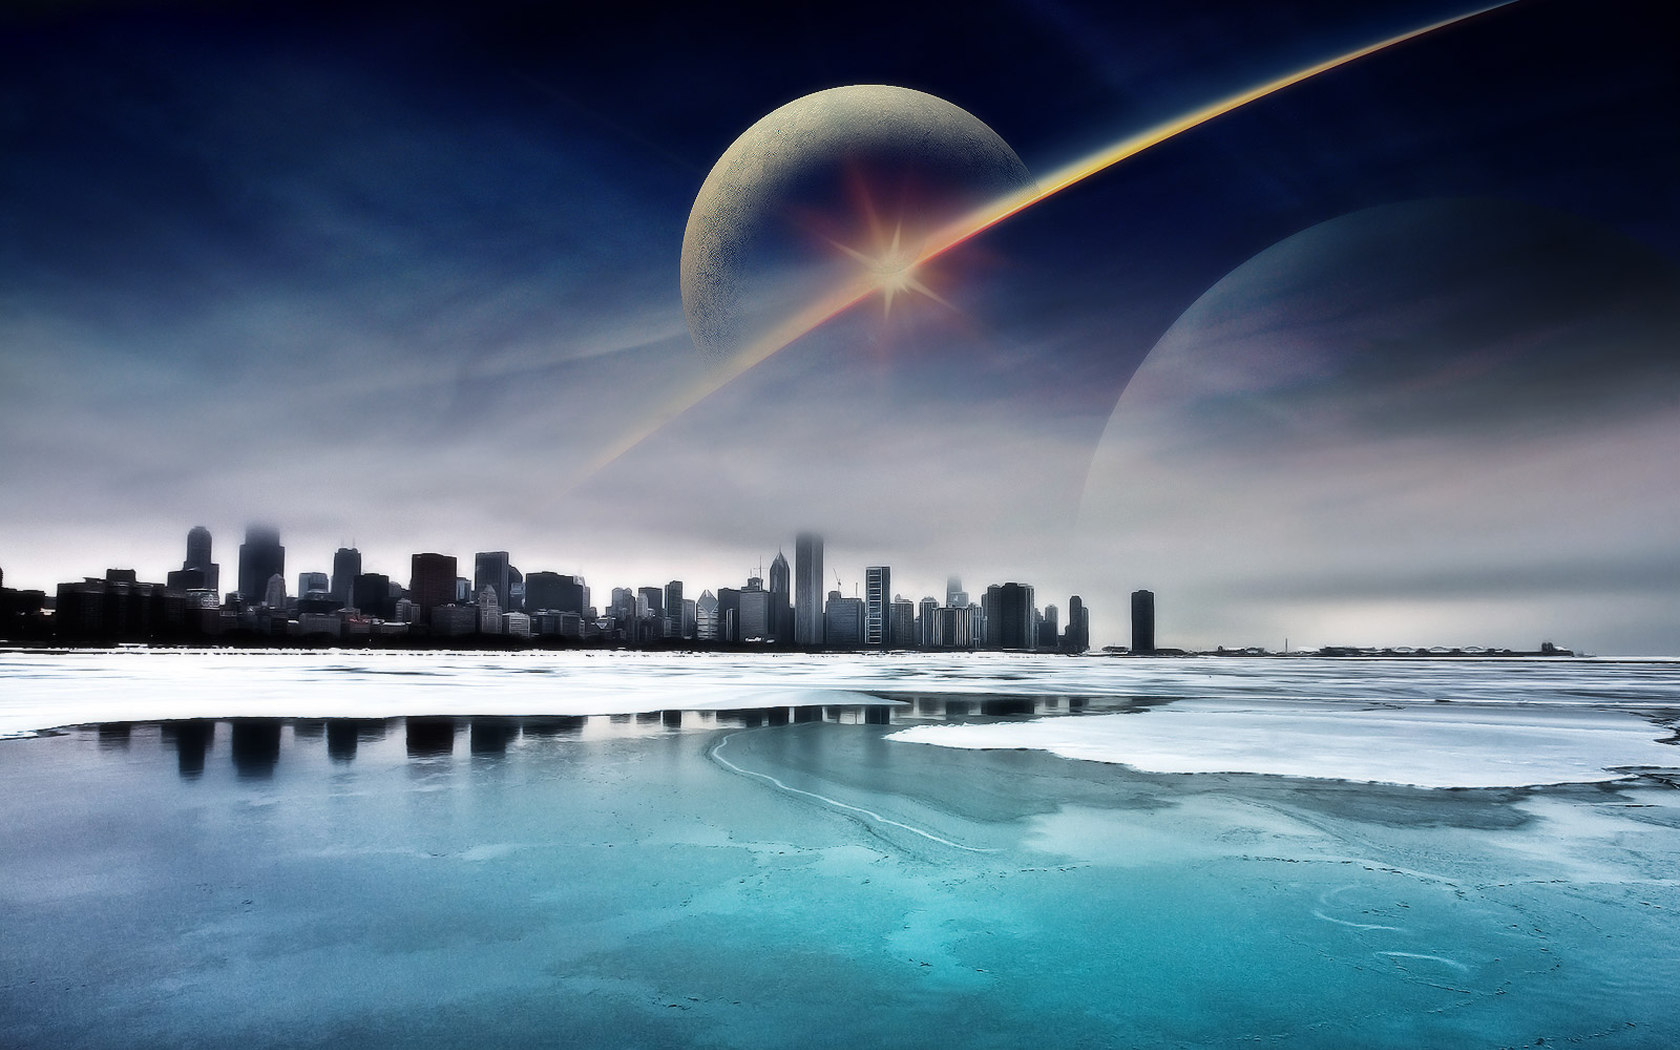 Free download wallpaper Earth, A Dreamy World on your PC desktop